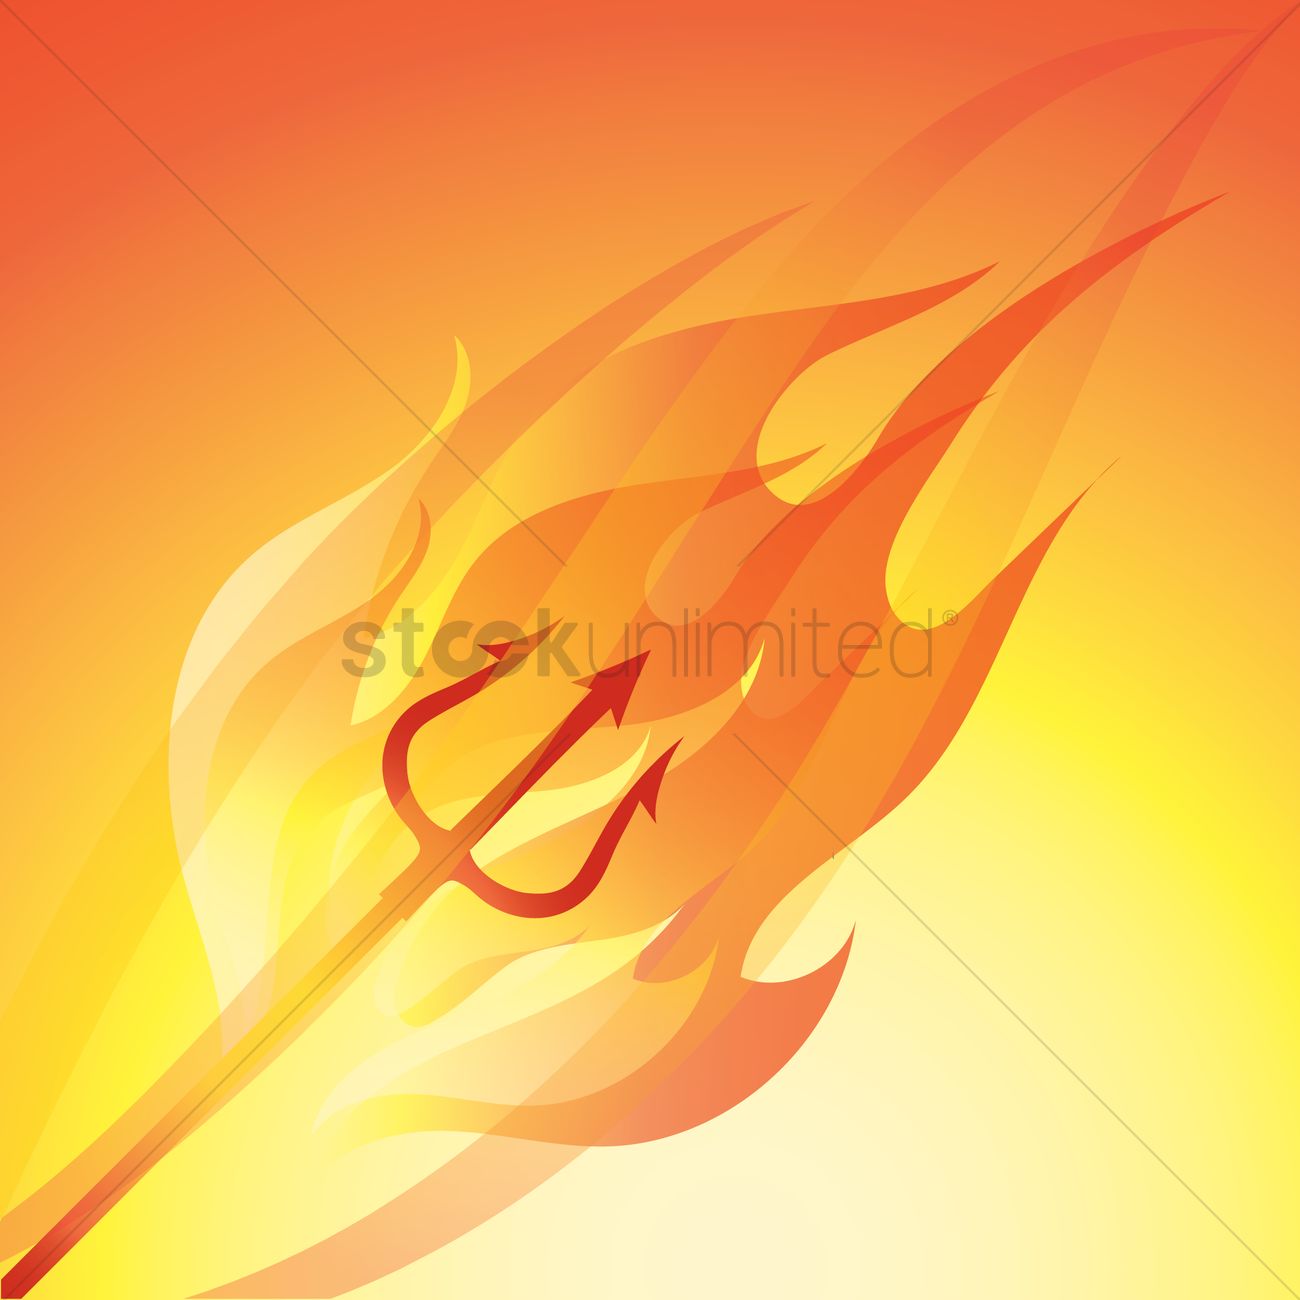 Pitchfork On Fire Vector Image Stockunlimited